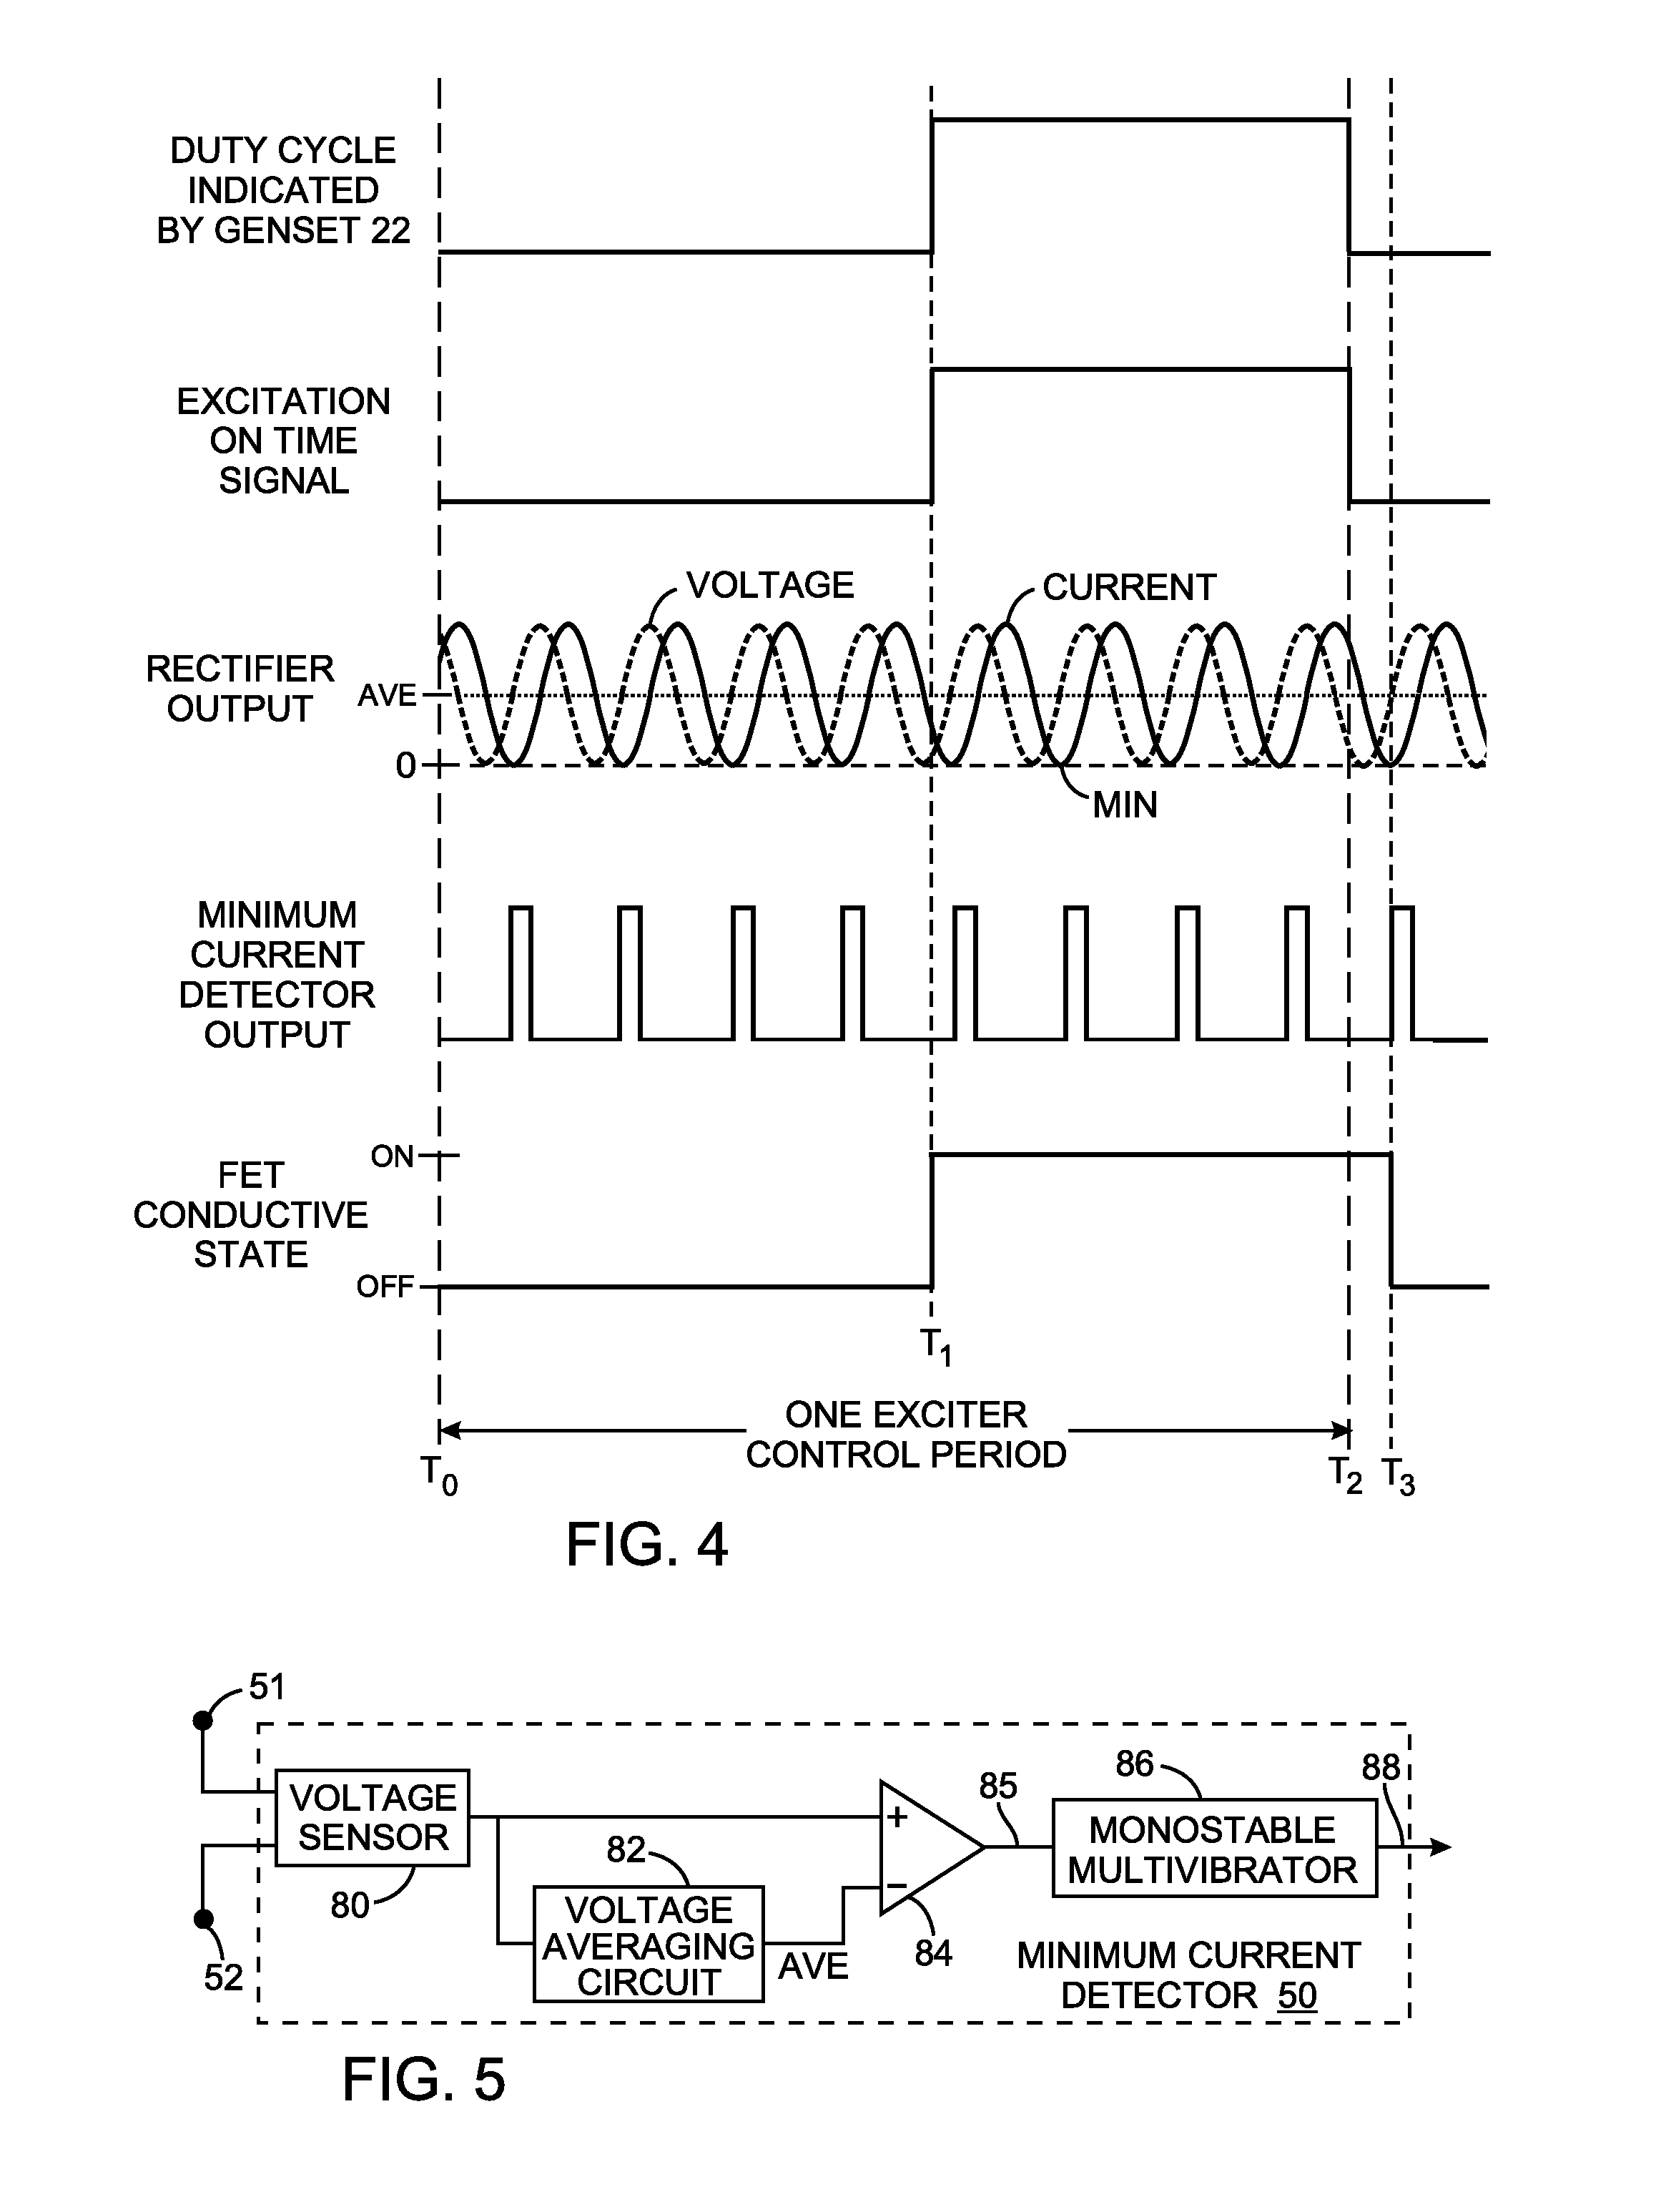 Resonant commutation system for exciting a three-phase alternator